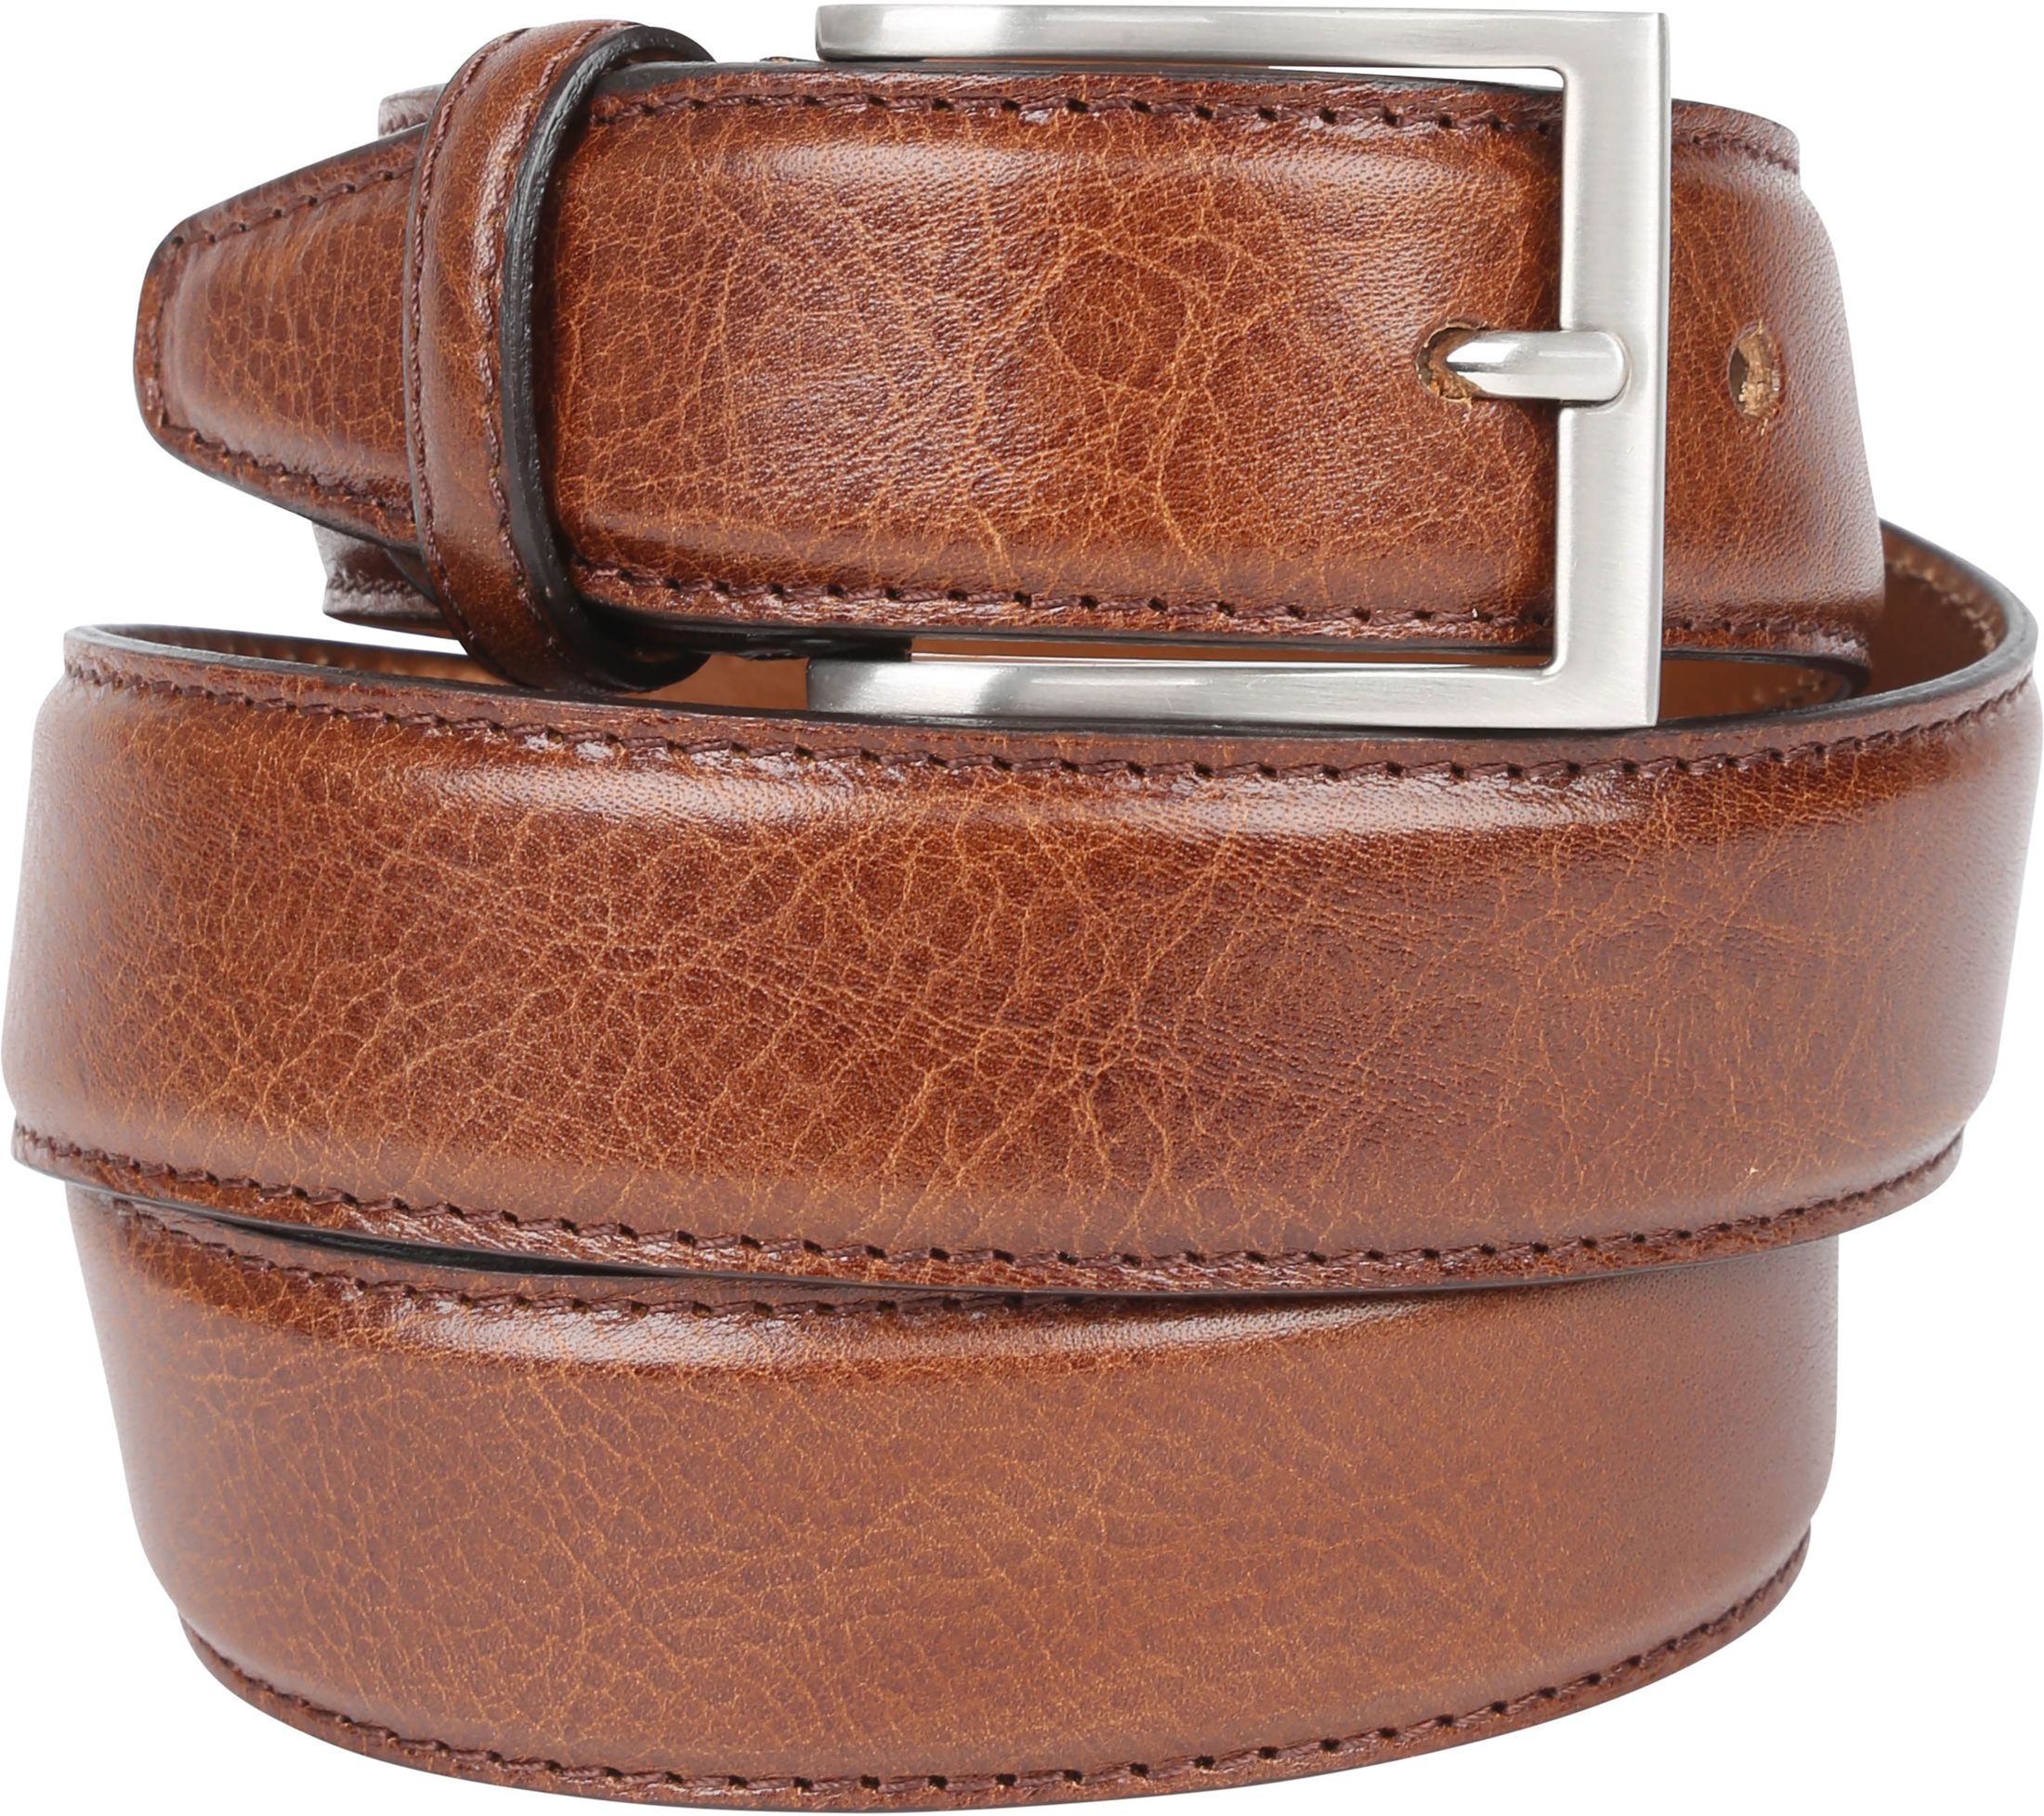 Profuomo Belt Calf Leather Brown size 35.4